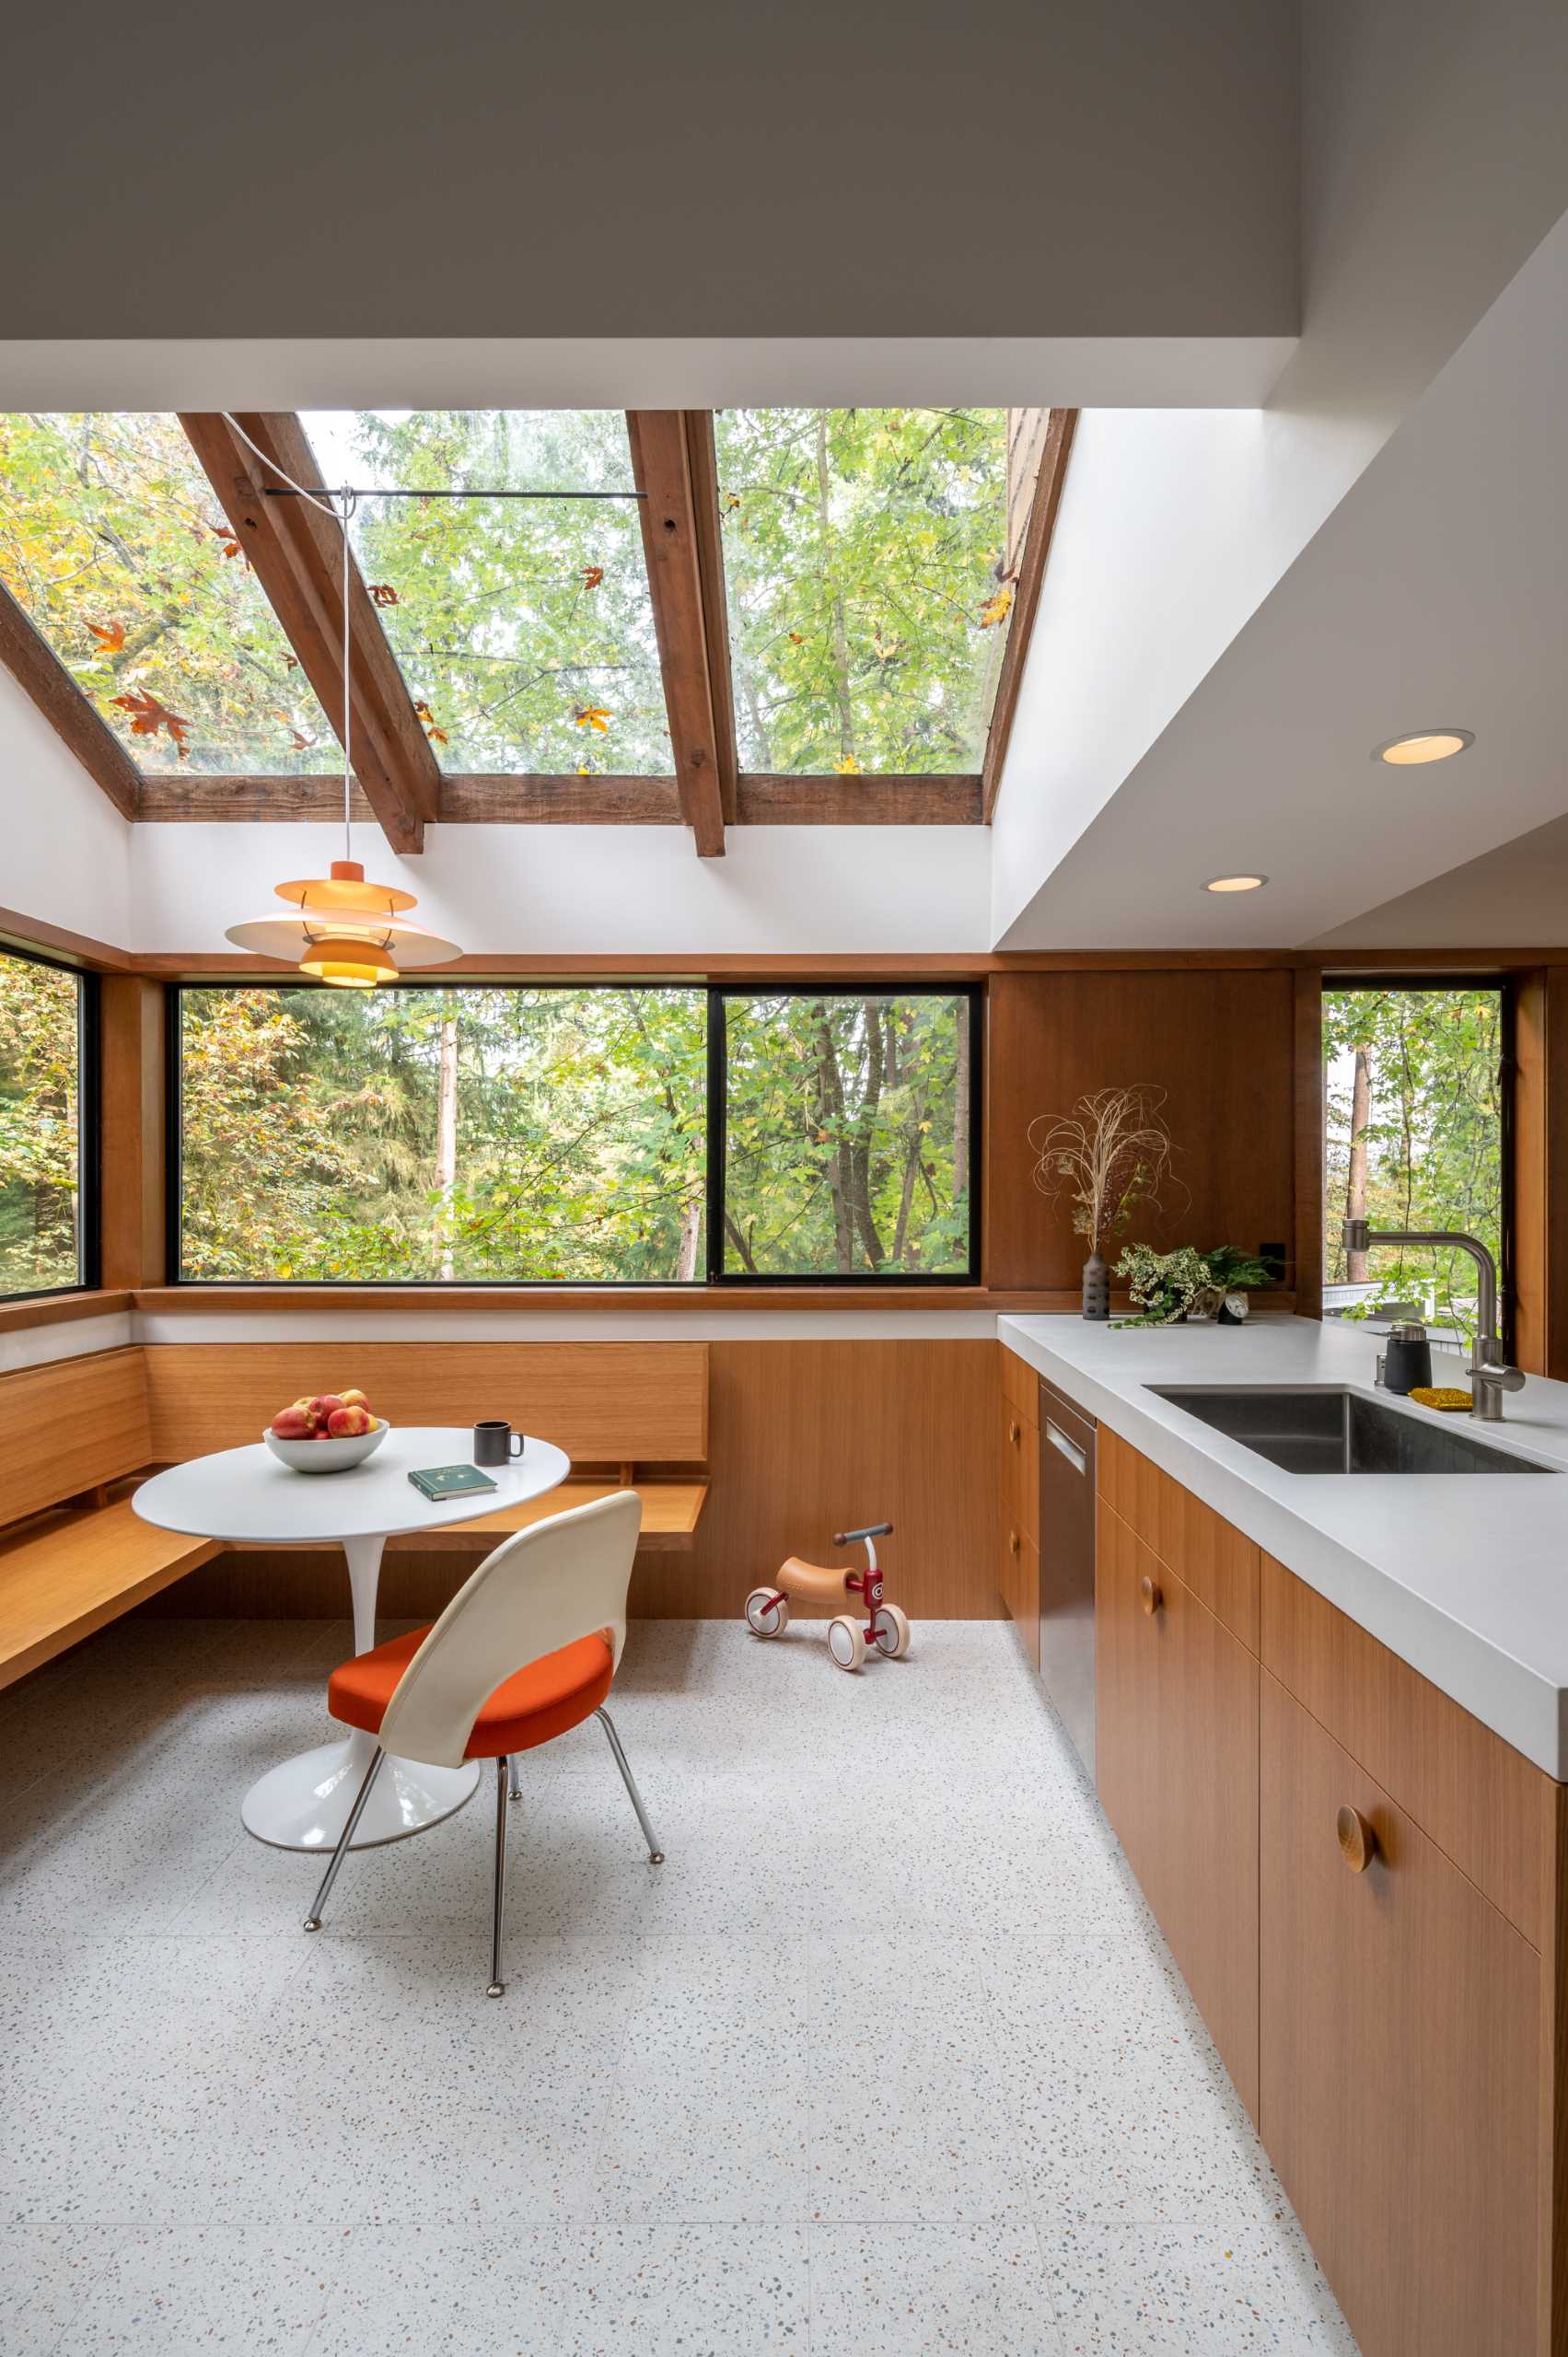 A remodeled kitchen with a built-in corner breakfast nook underneath the skylights and next to windows with forest views.